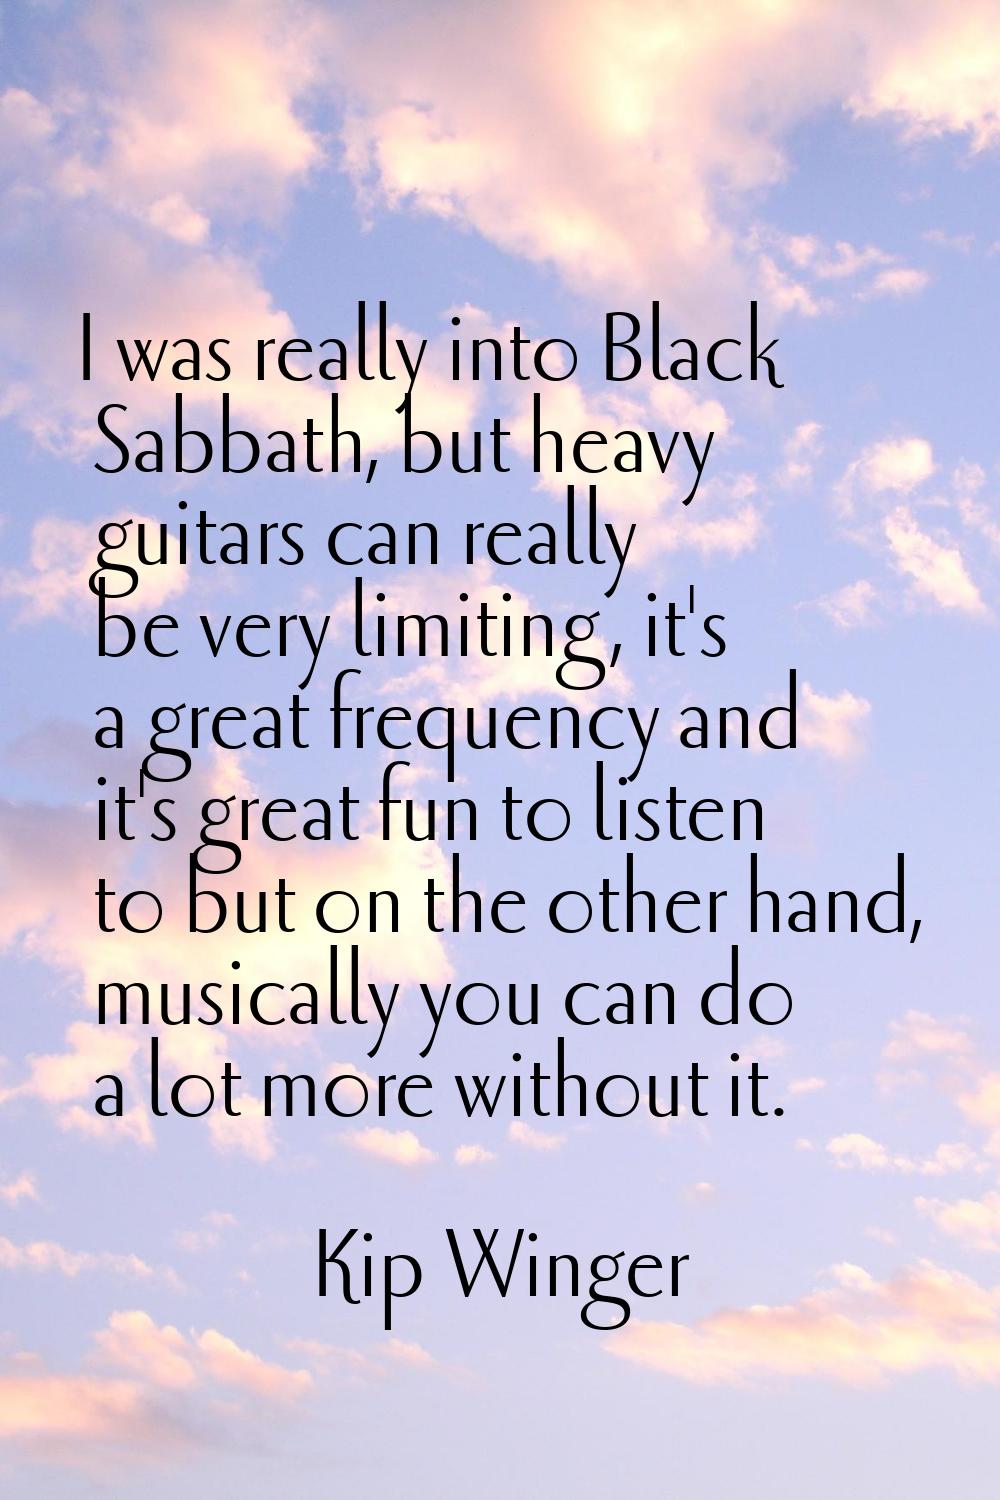 I was really into Black Sabbath, but heavy guitars can really be very limiting, it's a great freque